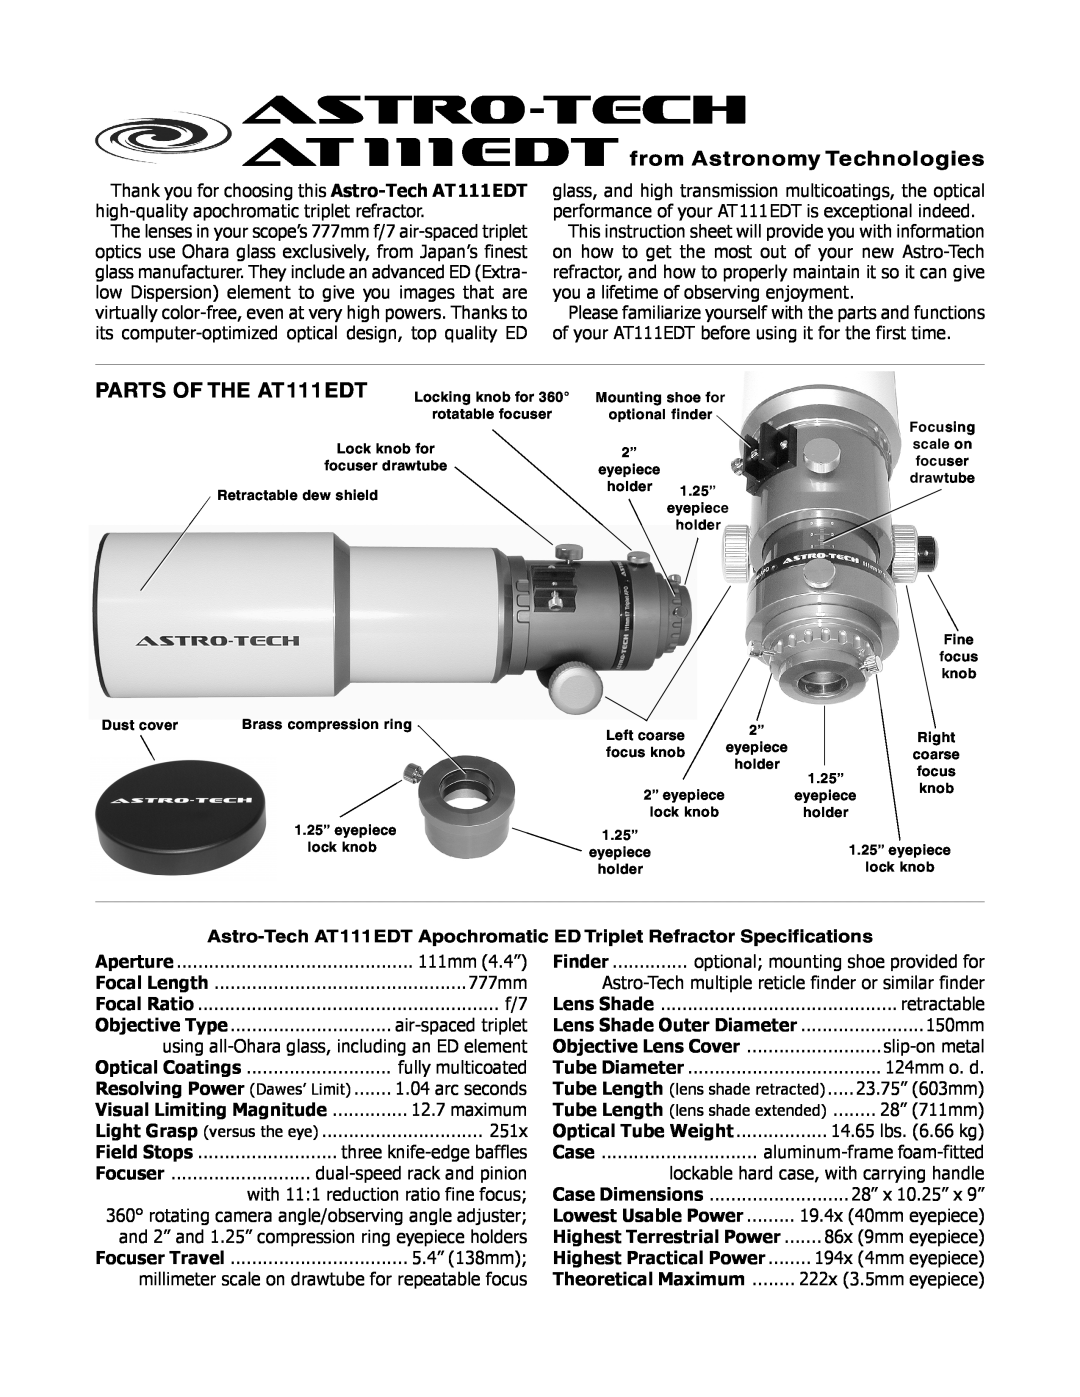 Meade instruction sheet Astro-Tech AT111EDT Apochromatic ED Triplet Refractor Specifications, astro-tech 